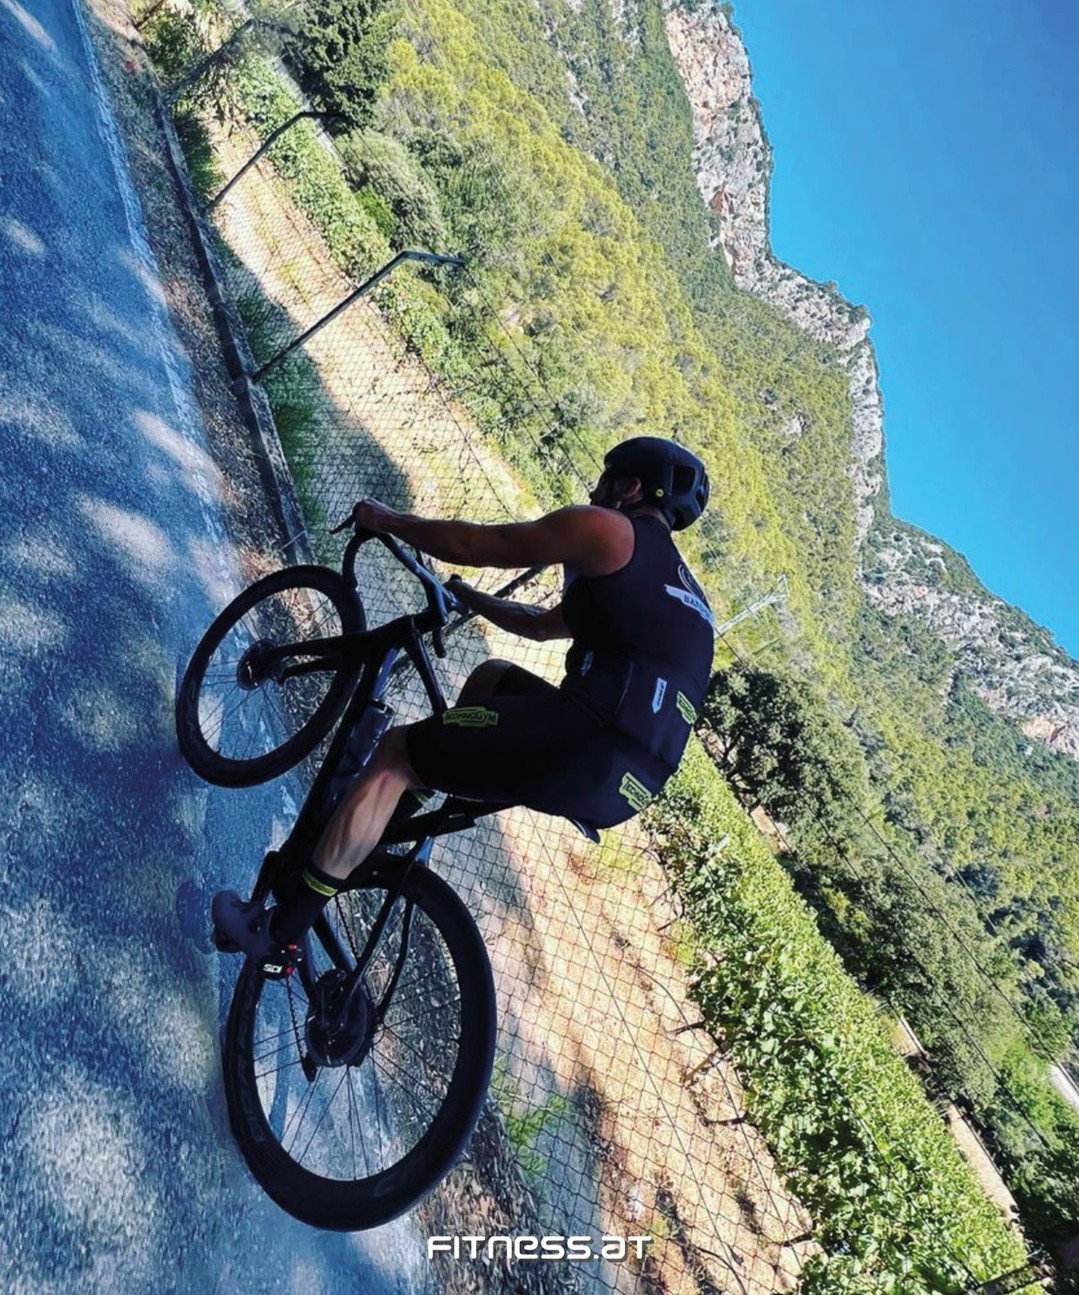 Life is like riding a bicycle, to stay balanced you must keep moving 🚴🏻⚖️.

📷 @gottfried_wurpes

#fitnessat #weilwirfitnessleben #feelit #outdoor #fun #feelfree #view #beautiful #moments #motivation #bandofcyclists #technogymaustria #cyclingbeauties #cycling #cyclinglife #cyclingbabes #mallorca #cyclinglifestyle #cyclingpassion #cyclinglove #fitnessmodel